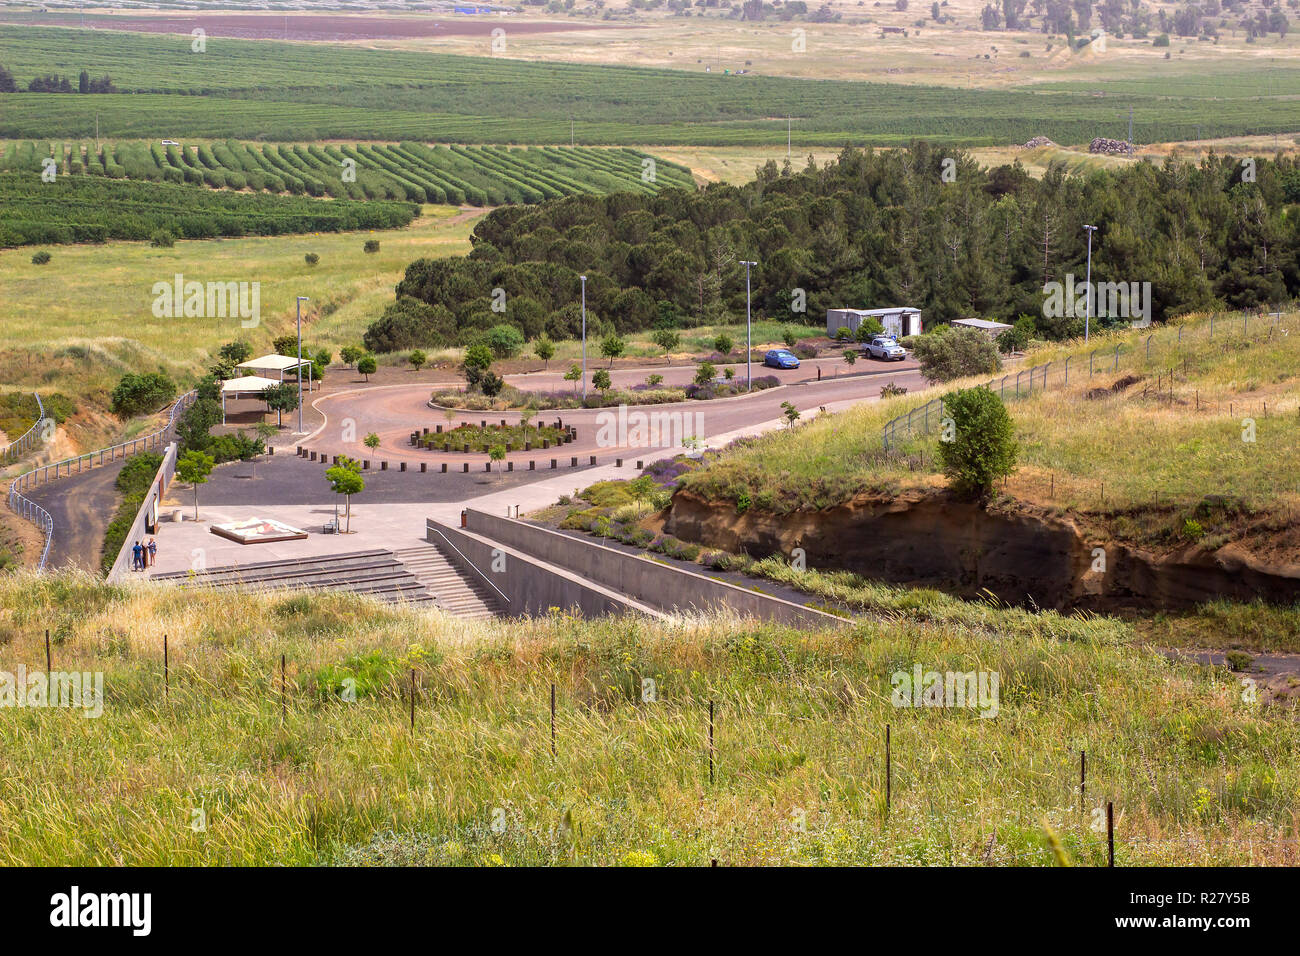 4 May 2018 Syrian real estate close to the Israeli border as seen from the Northern Golan Heights in North East Israel Stock Photo